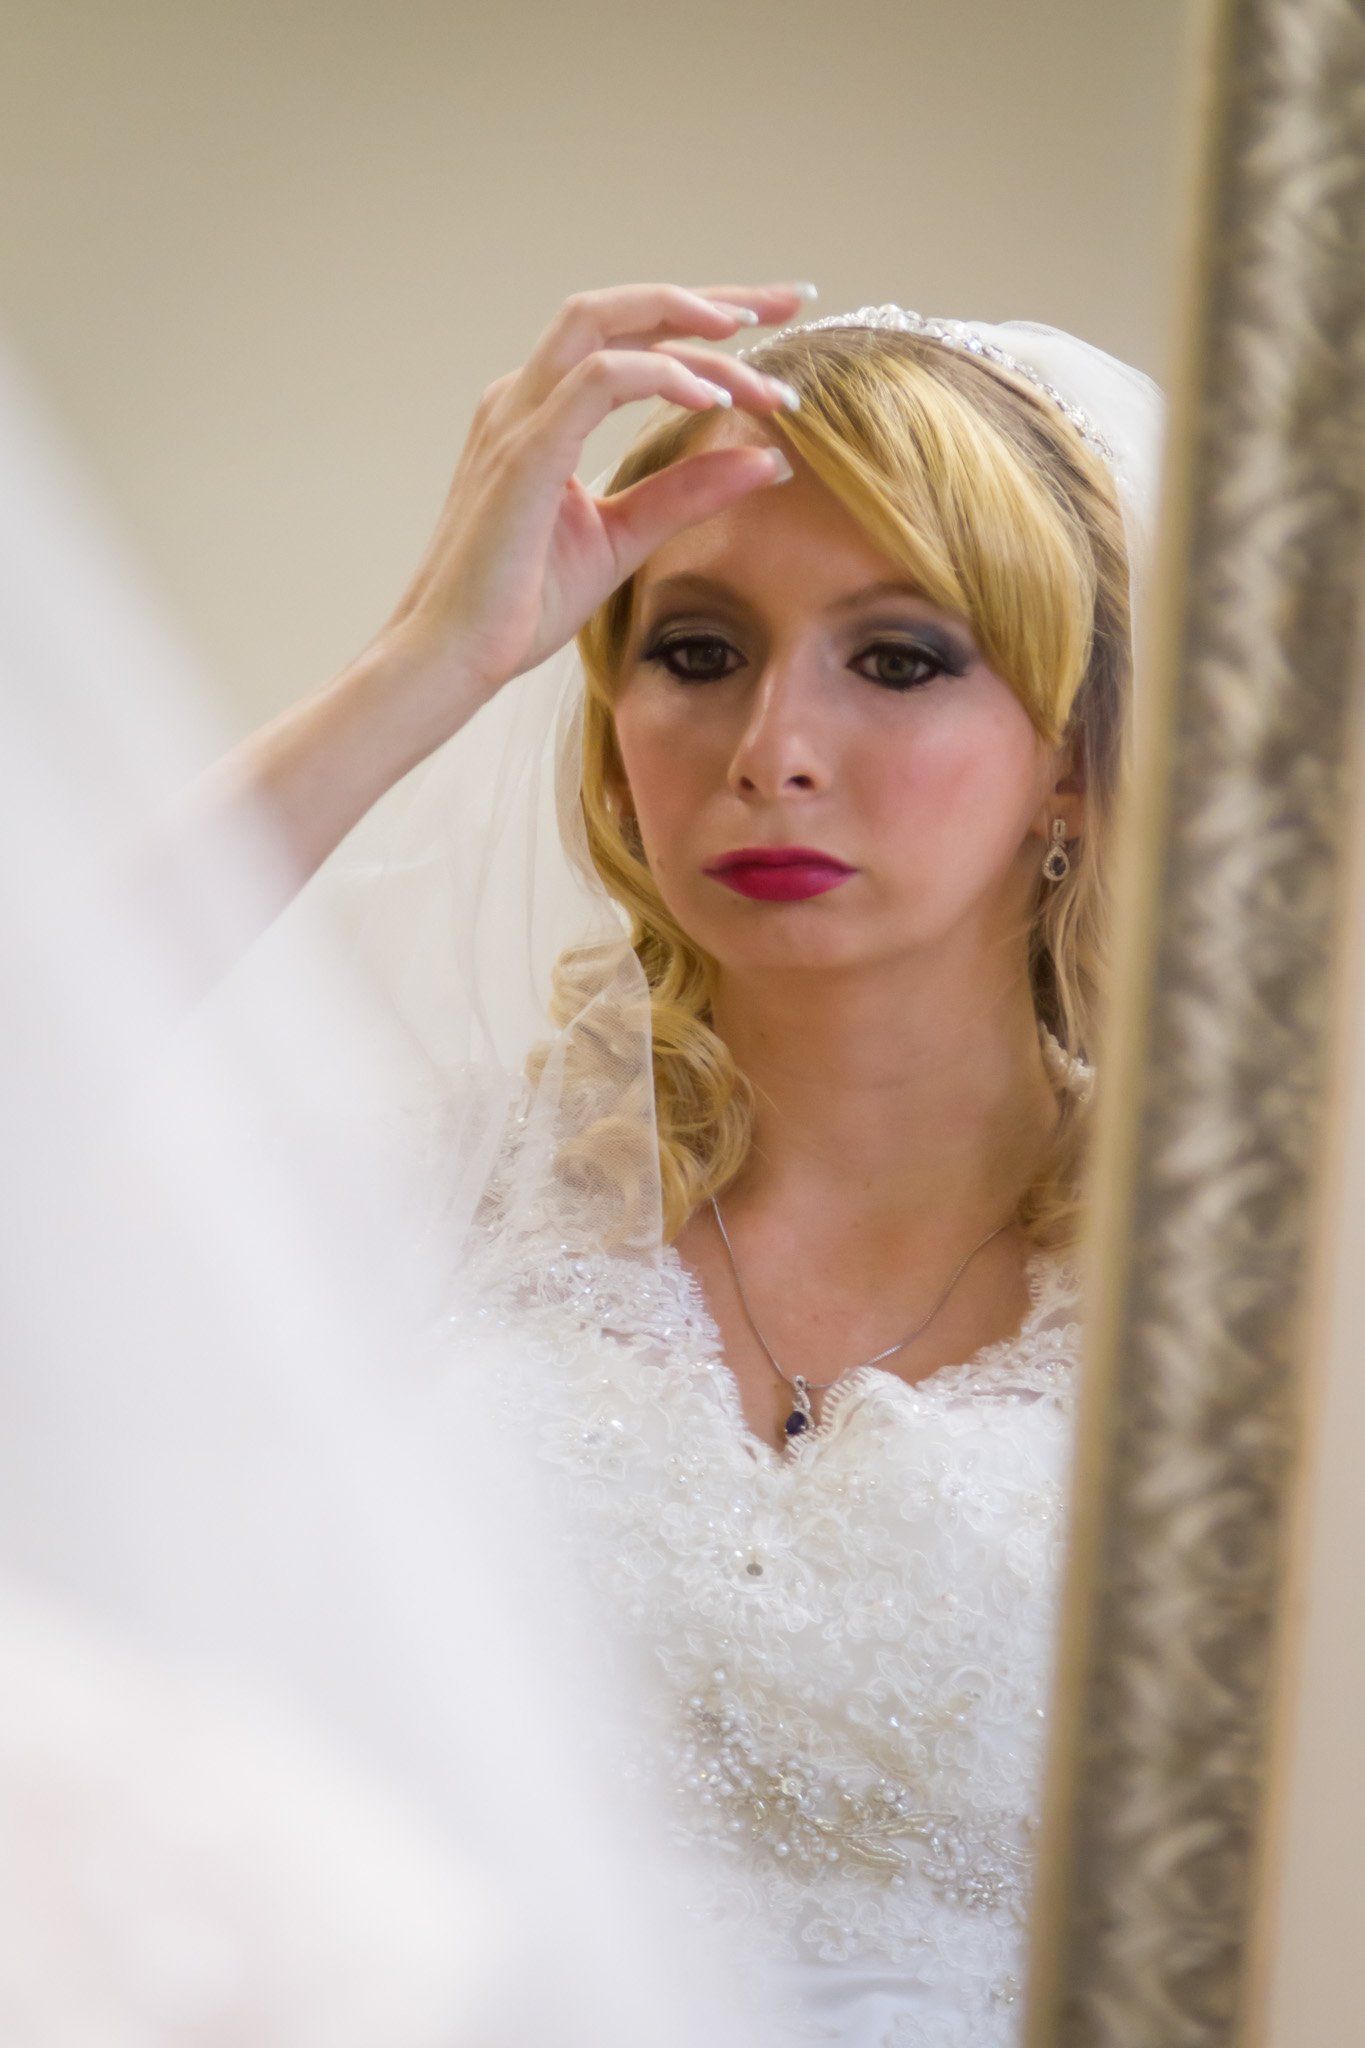 A portrait of the bride looking at herself in the mirror as she gets ready and checks her veil